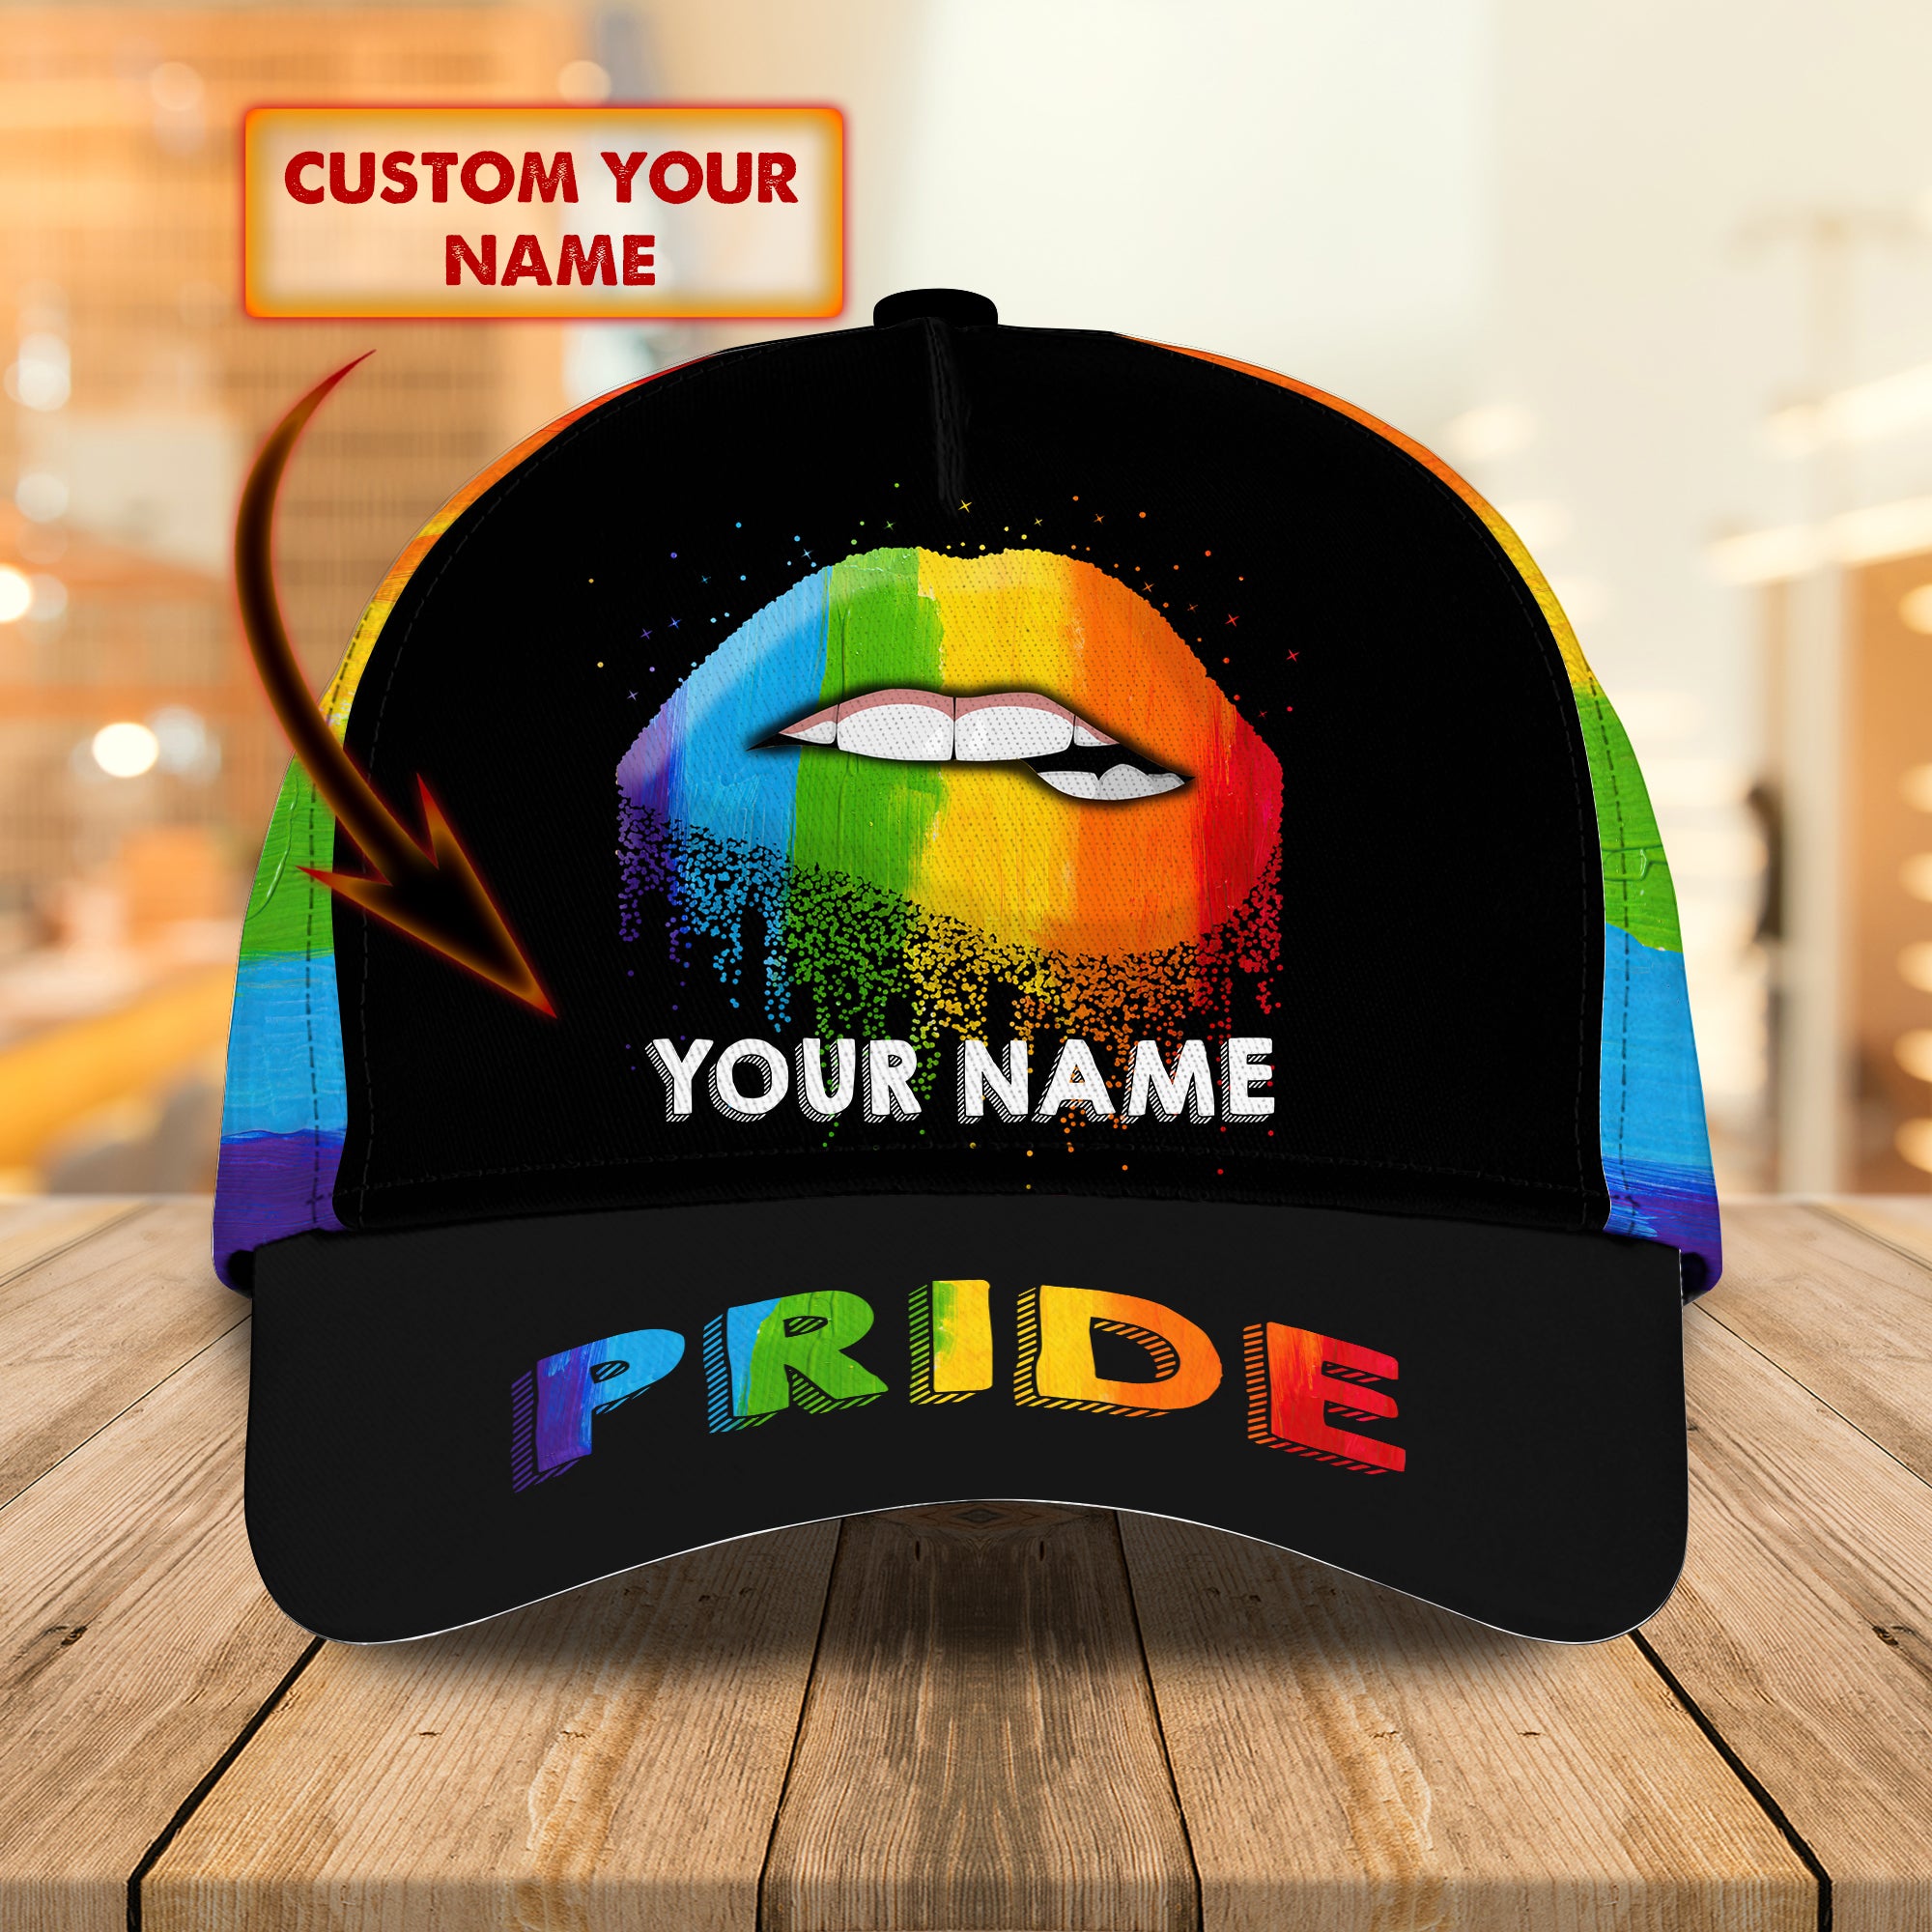 Super LGBT 15 - Personalized Name Cap - Cpd